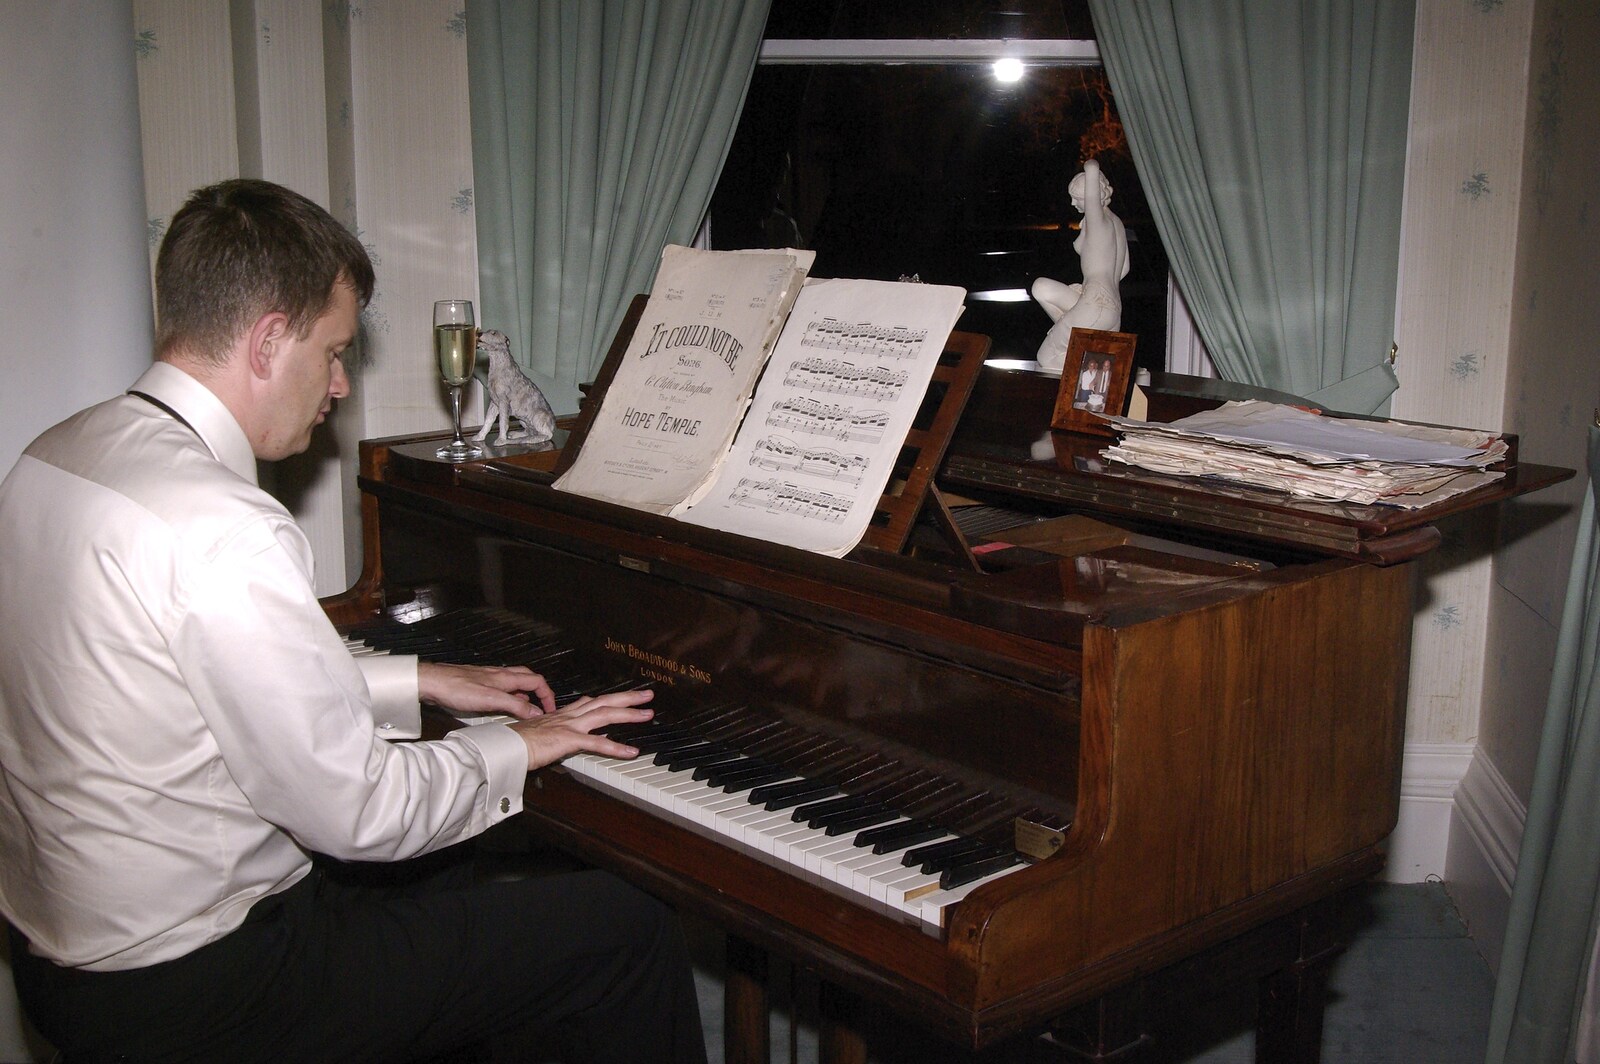 Paul and Jenny's Wedding, Tralee, County Kerry, Ireland - 3rd May 2008: Nosher plays piano